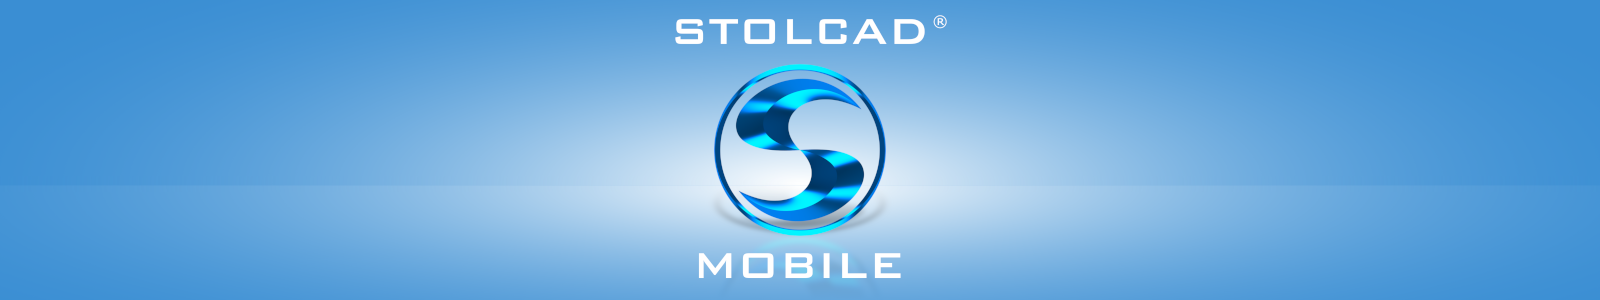 Stolcad Mobile - app for pricing windows